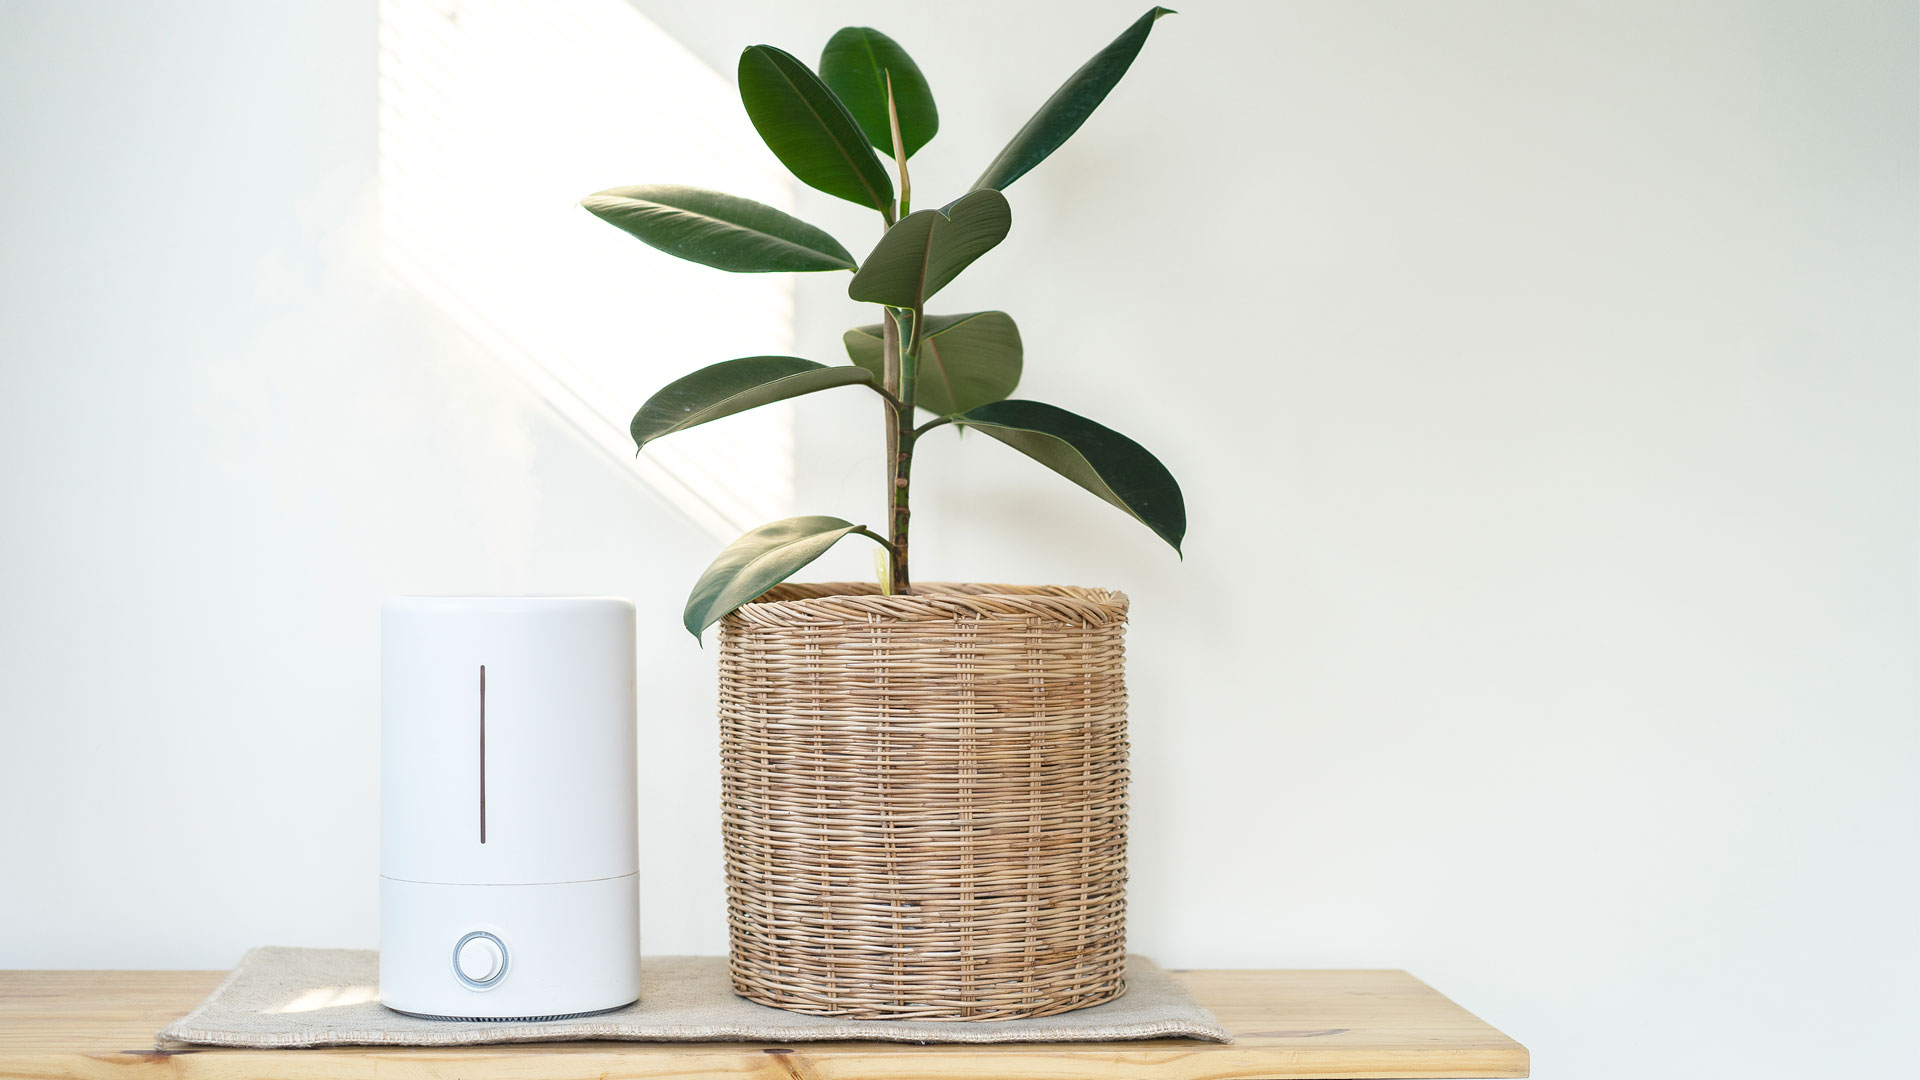 Air Purifiers vs. Ionizers: The image shows an air purifier next to a plant